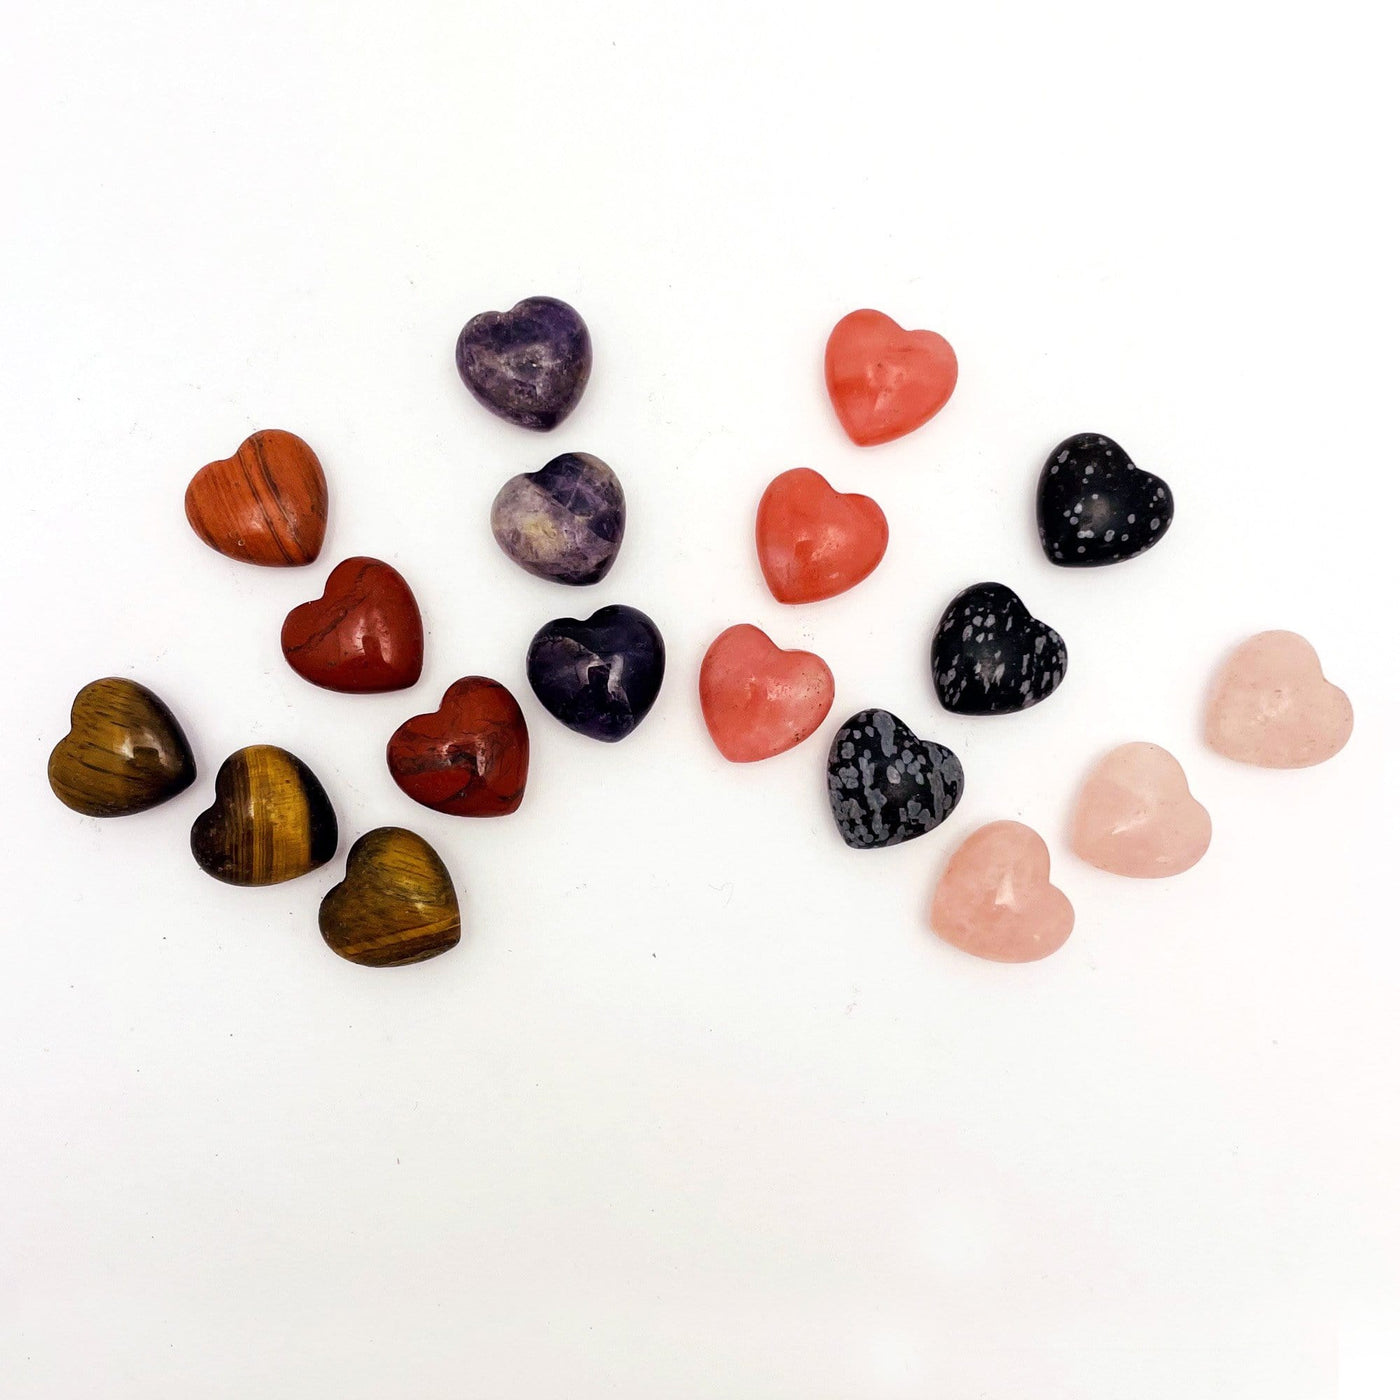 Stone hearts in all the available sgtones, tigers eye, red jasper, amethyst, strawberry quartz, rose quartz, snowflake obsidian fanned out on a table